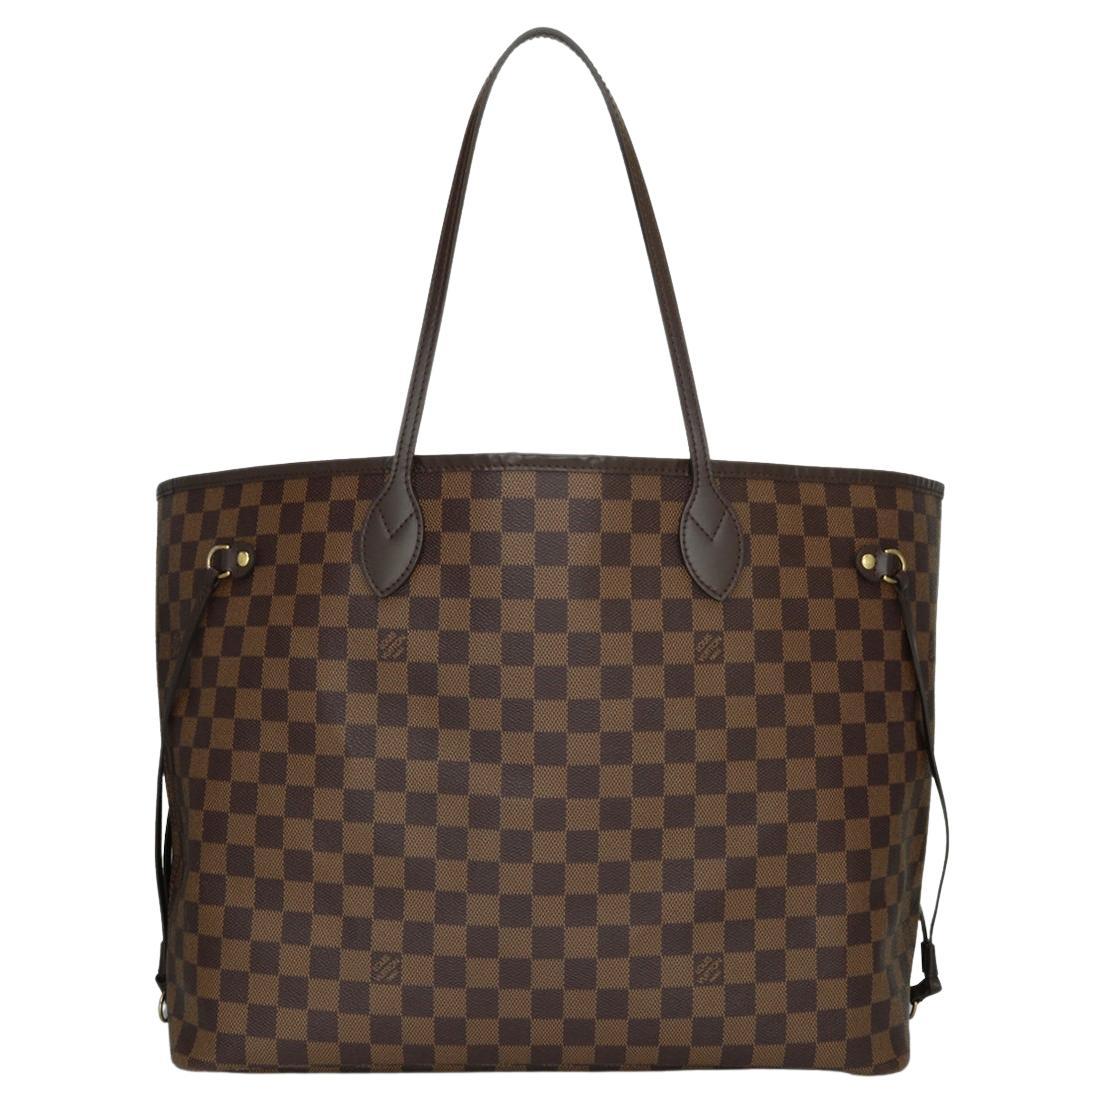 Louis Vuitton Neverfull GM Bag in Damier Ebène with Cherry Red Interior 2015